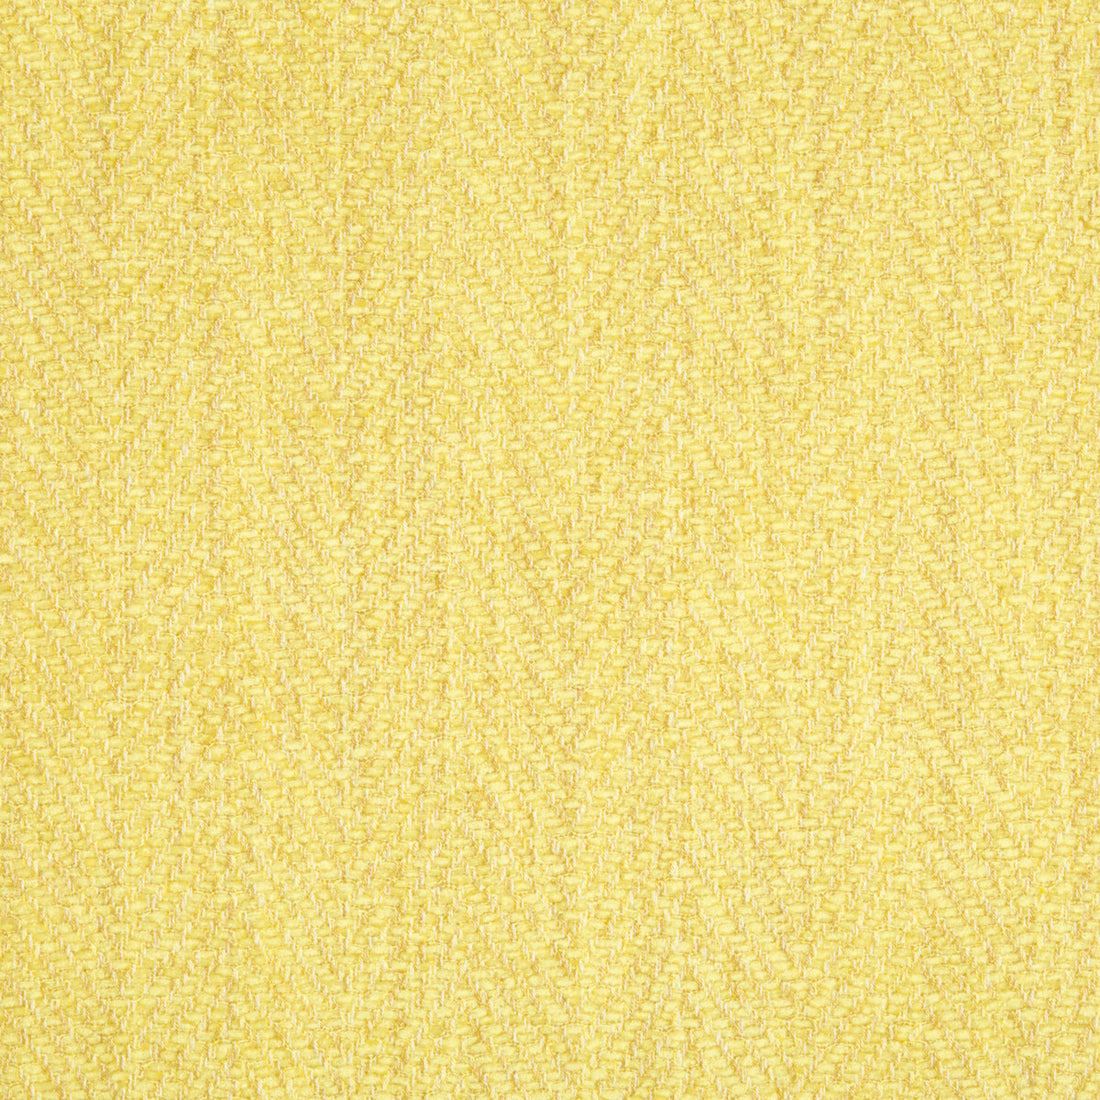 Firle Chenille II fabric in canary color - pattern 8017140.40.0 - by Brunschwig &amp; Fils in the Baronet collection